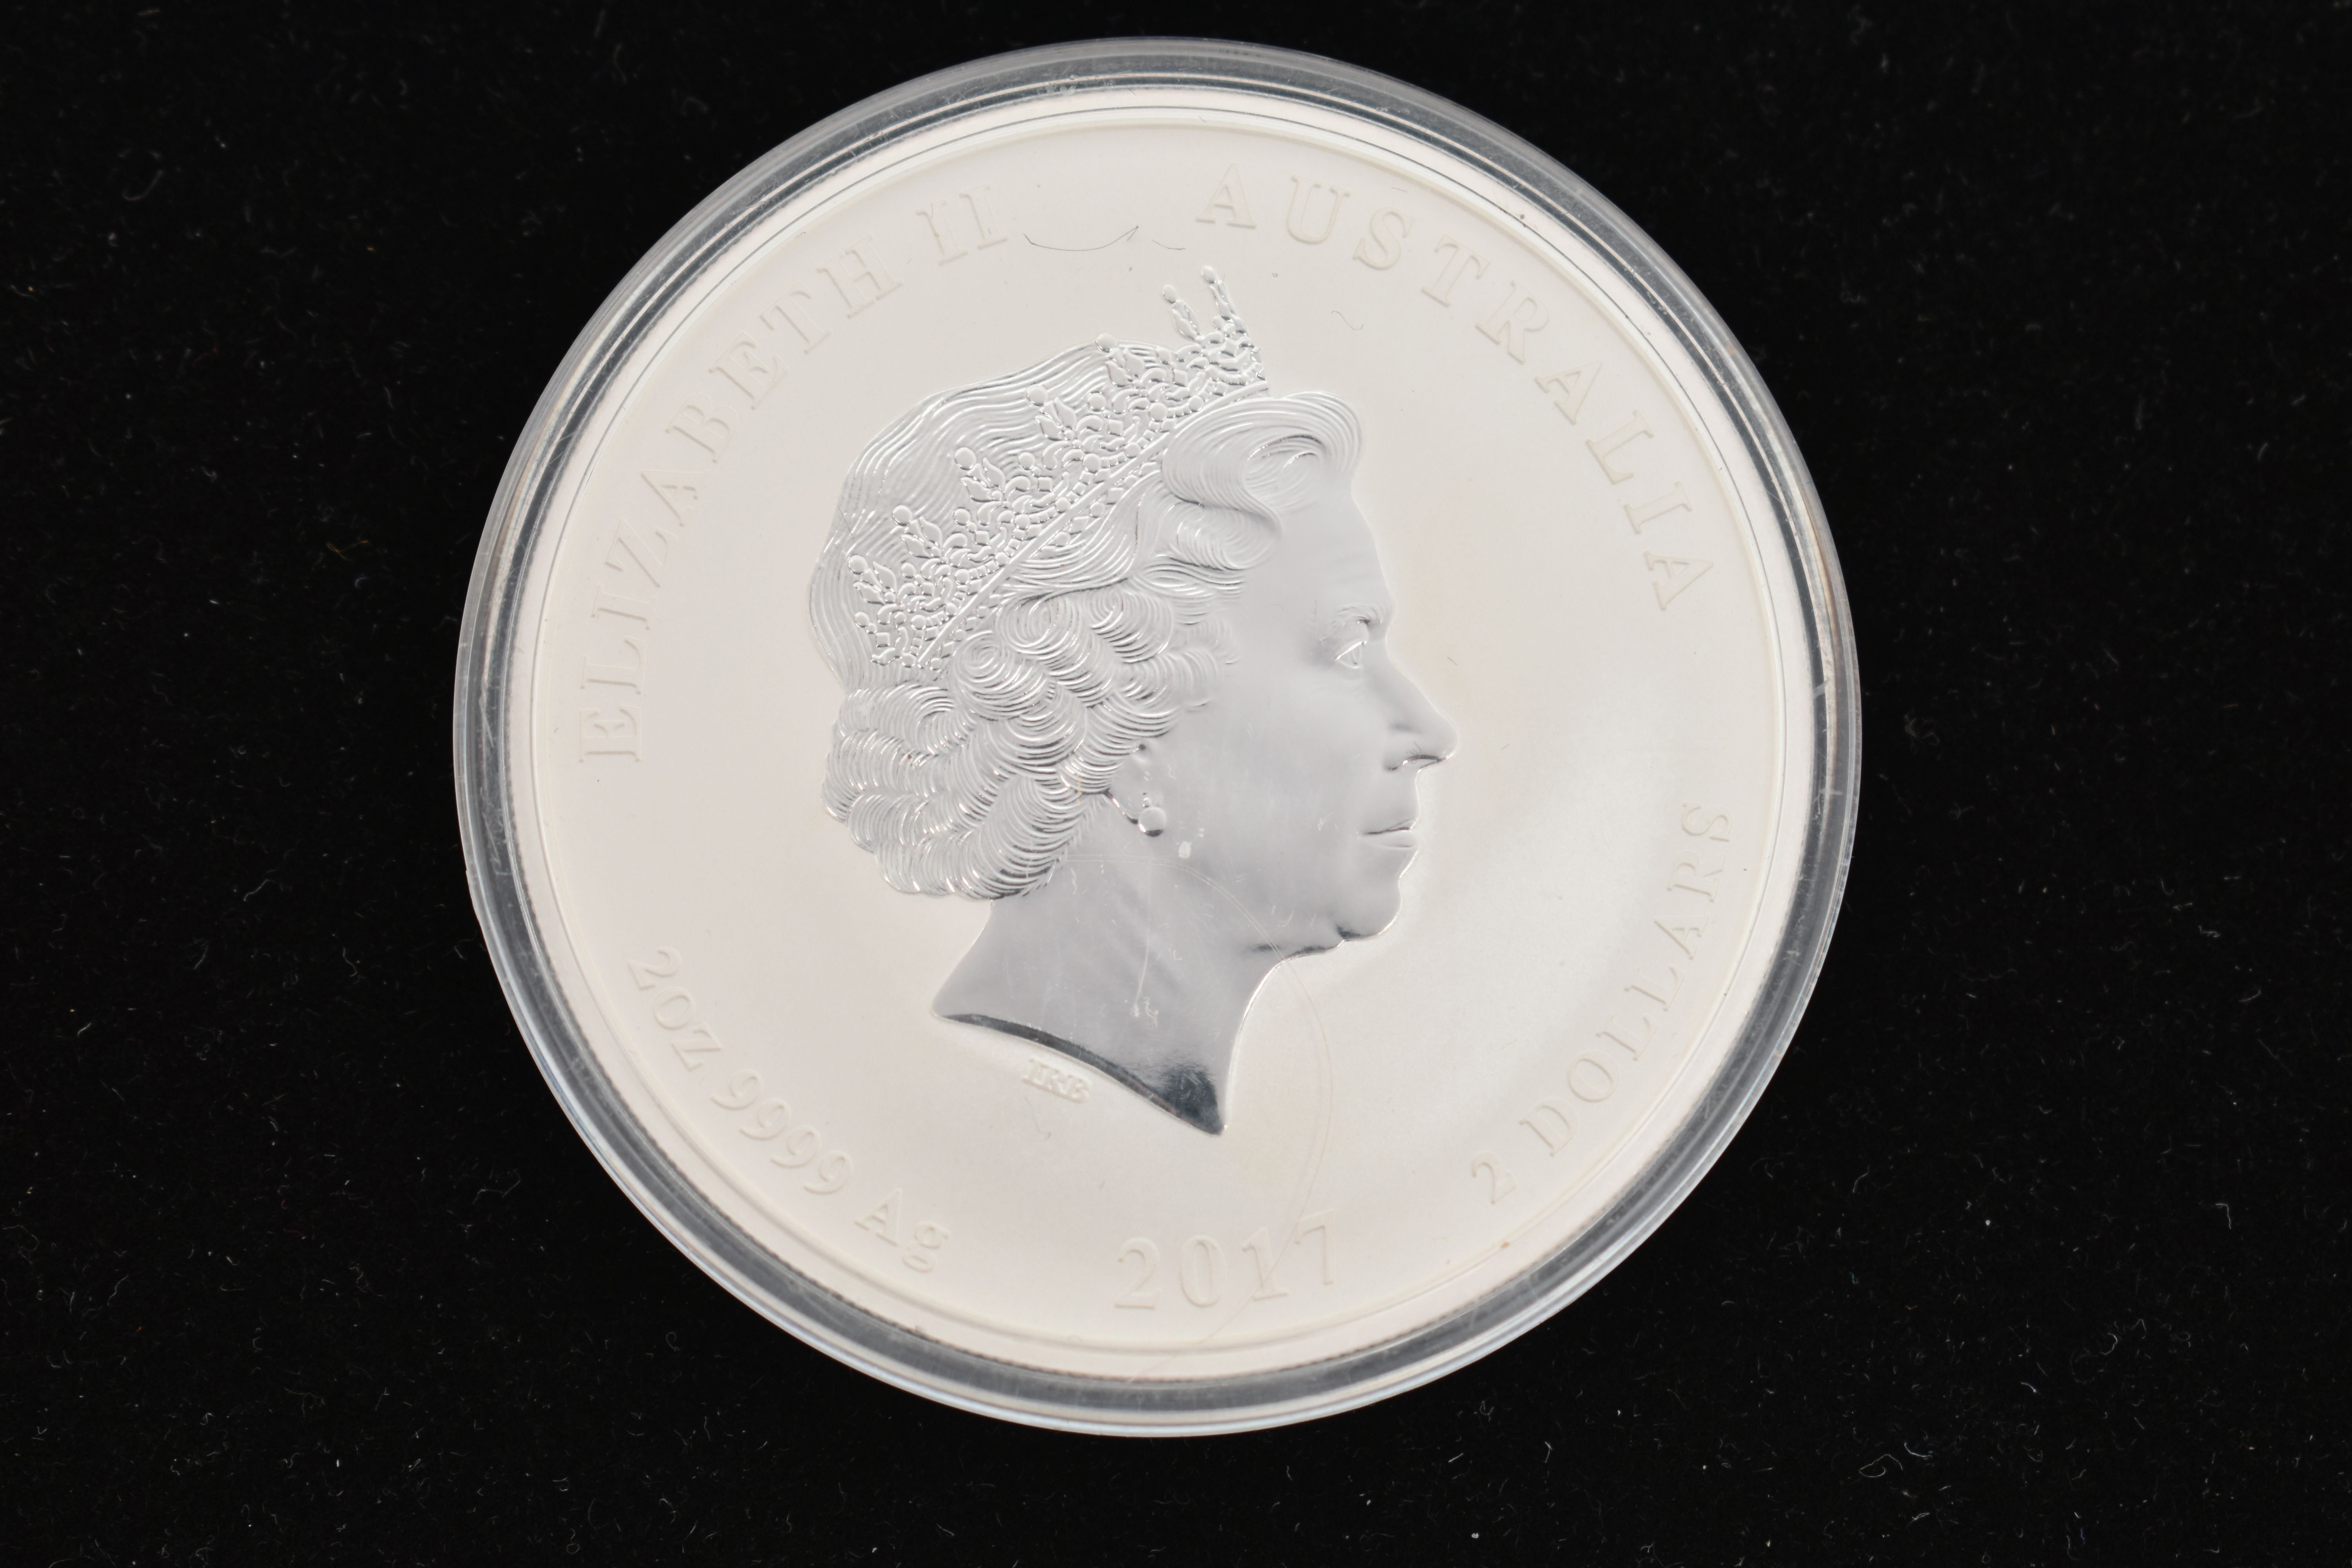 AN ELIZABETH II, AUSTRALIA 2OZ 9999 AG 2 DOLLAR COIN, dated 2017, 'Year of The Rooster', in a - Image 2 of 2